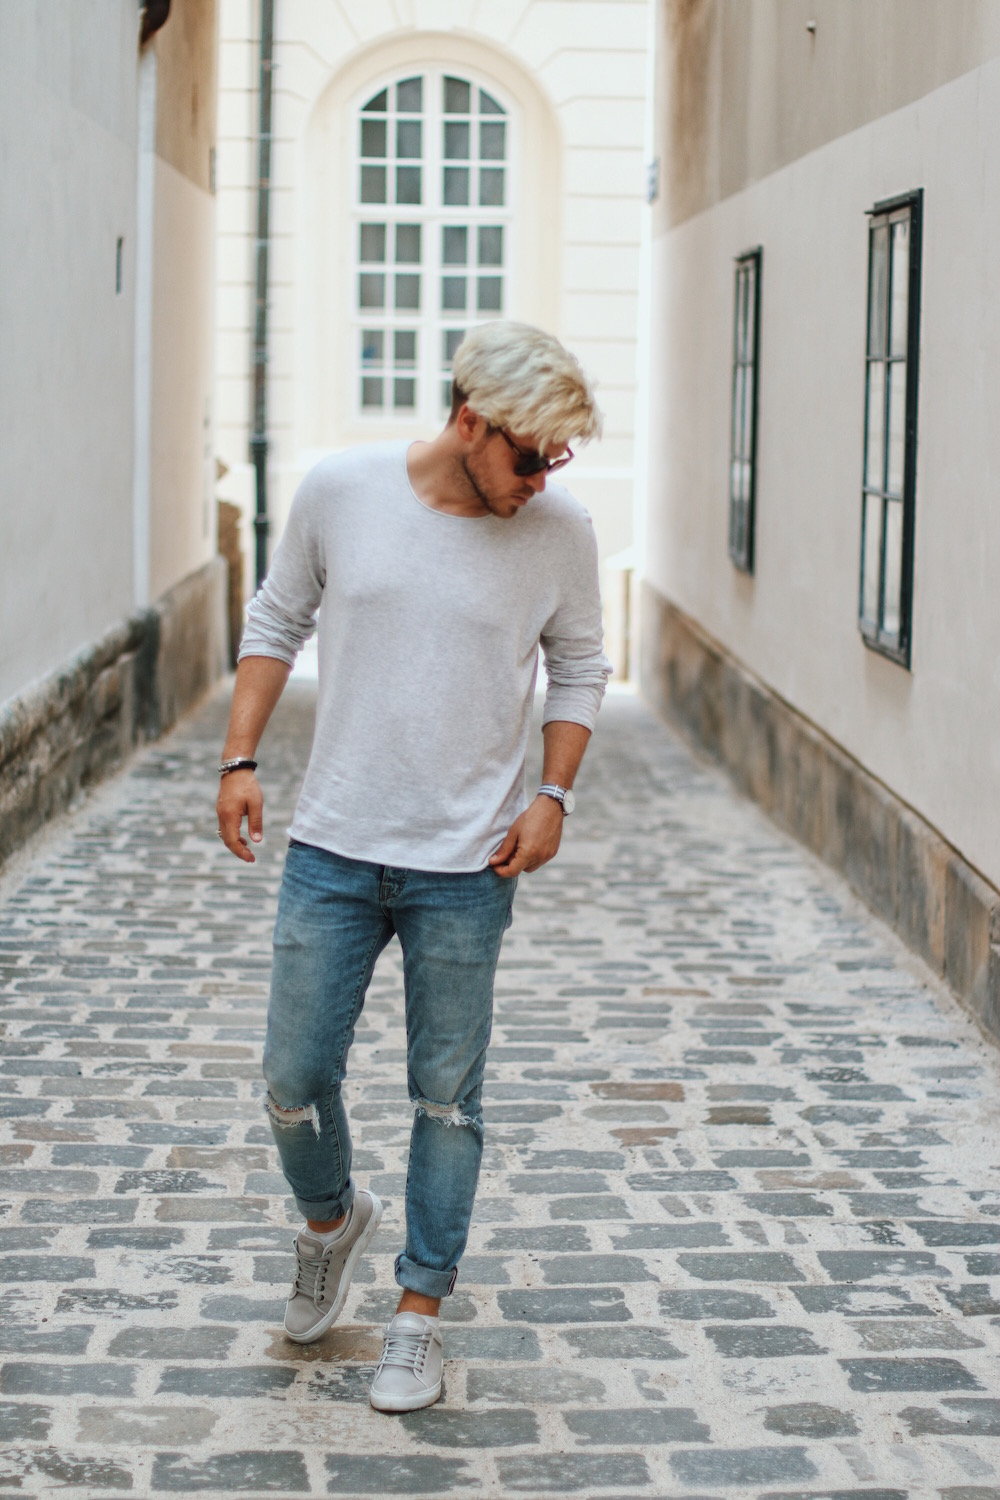 Summer Knit and Ripped Jeans_Outfit by Meanwhile in Awesometown_Selected_Jack and Jones Denim_Thomas Sabo Rebel at Heart